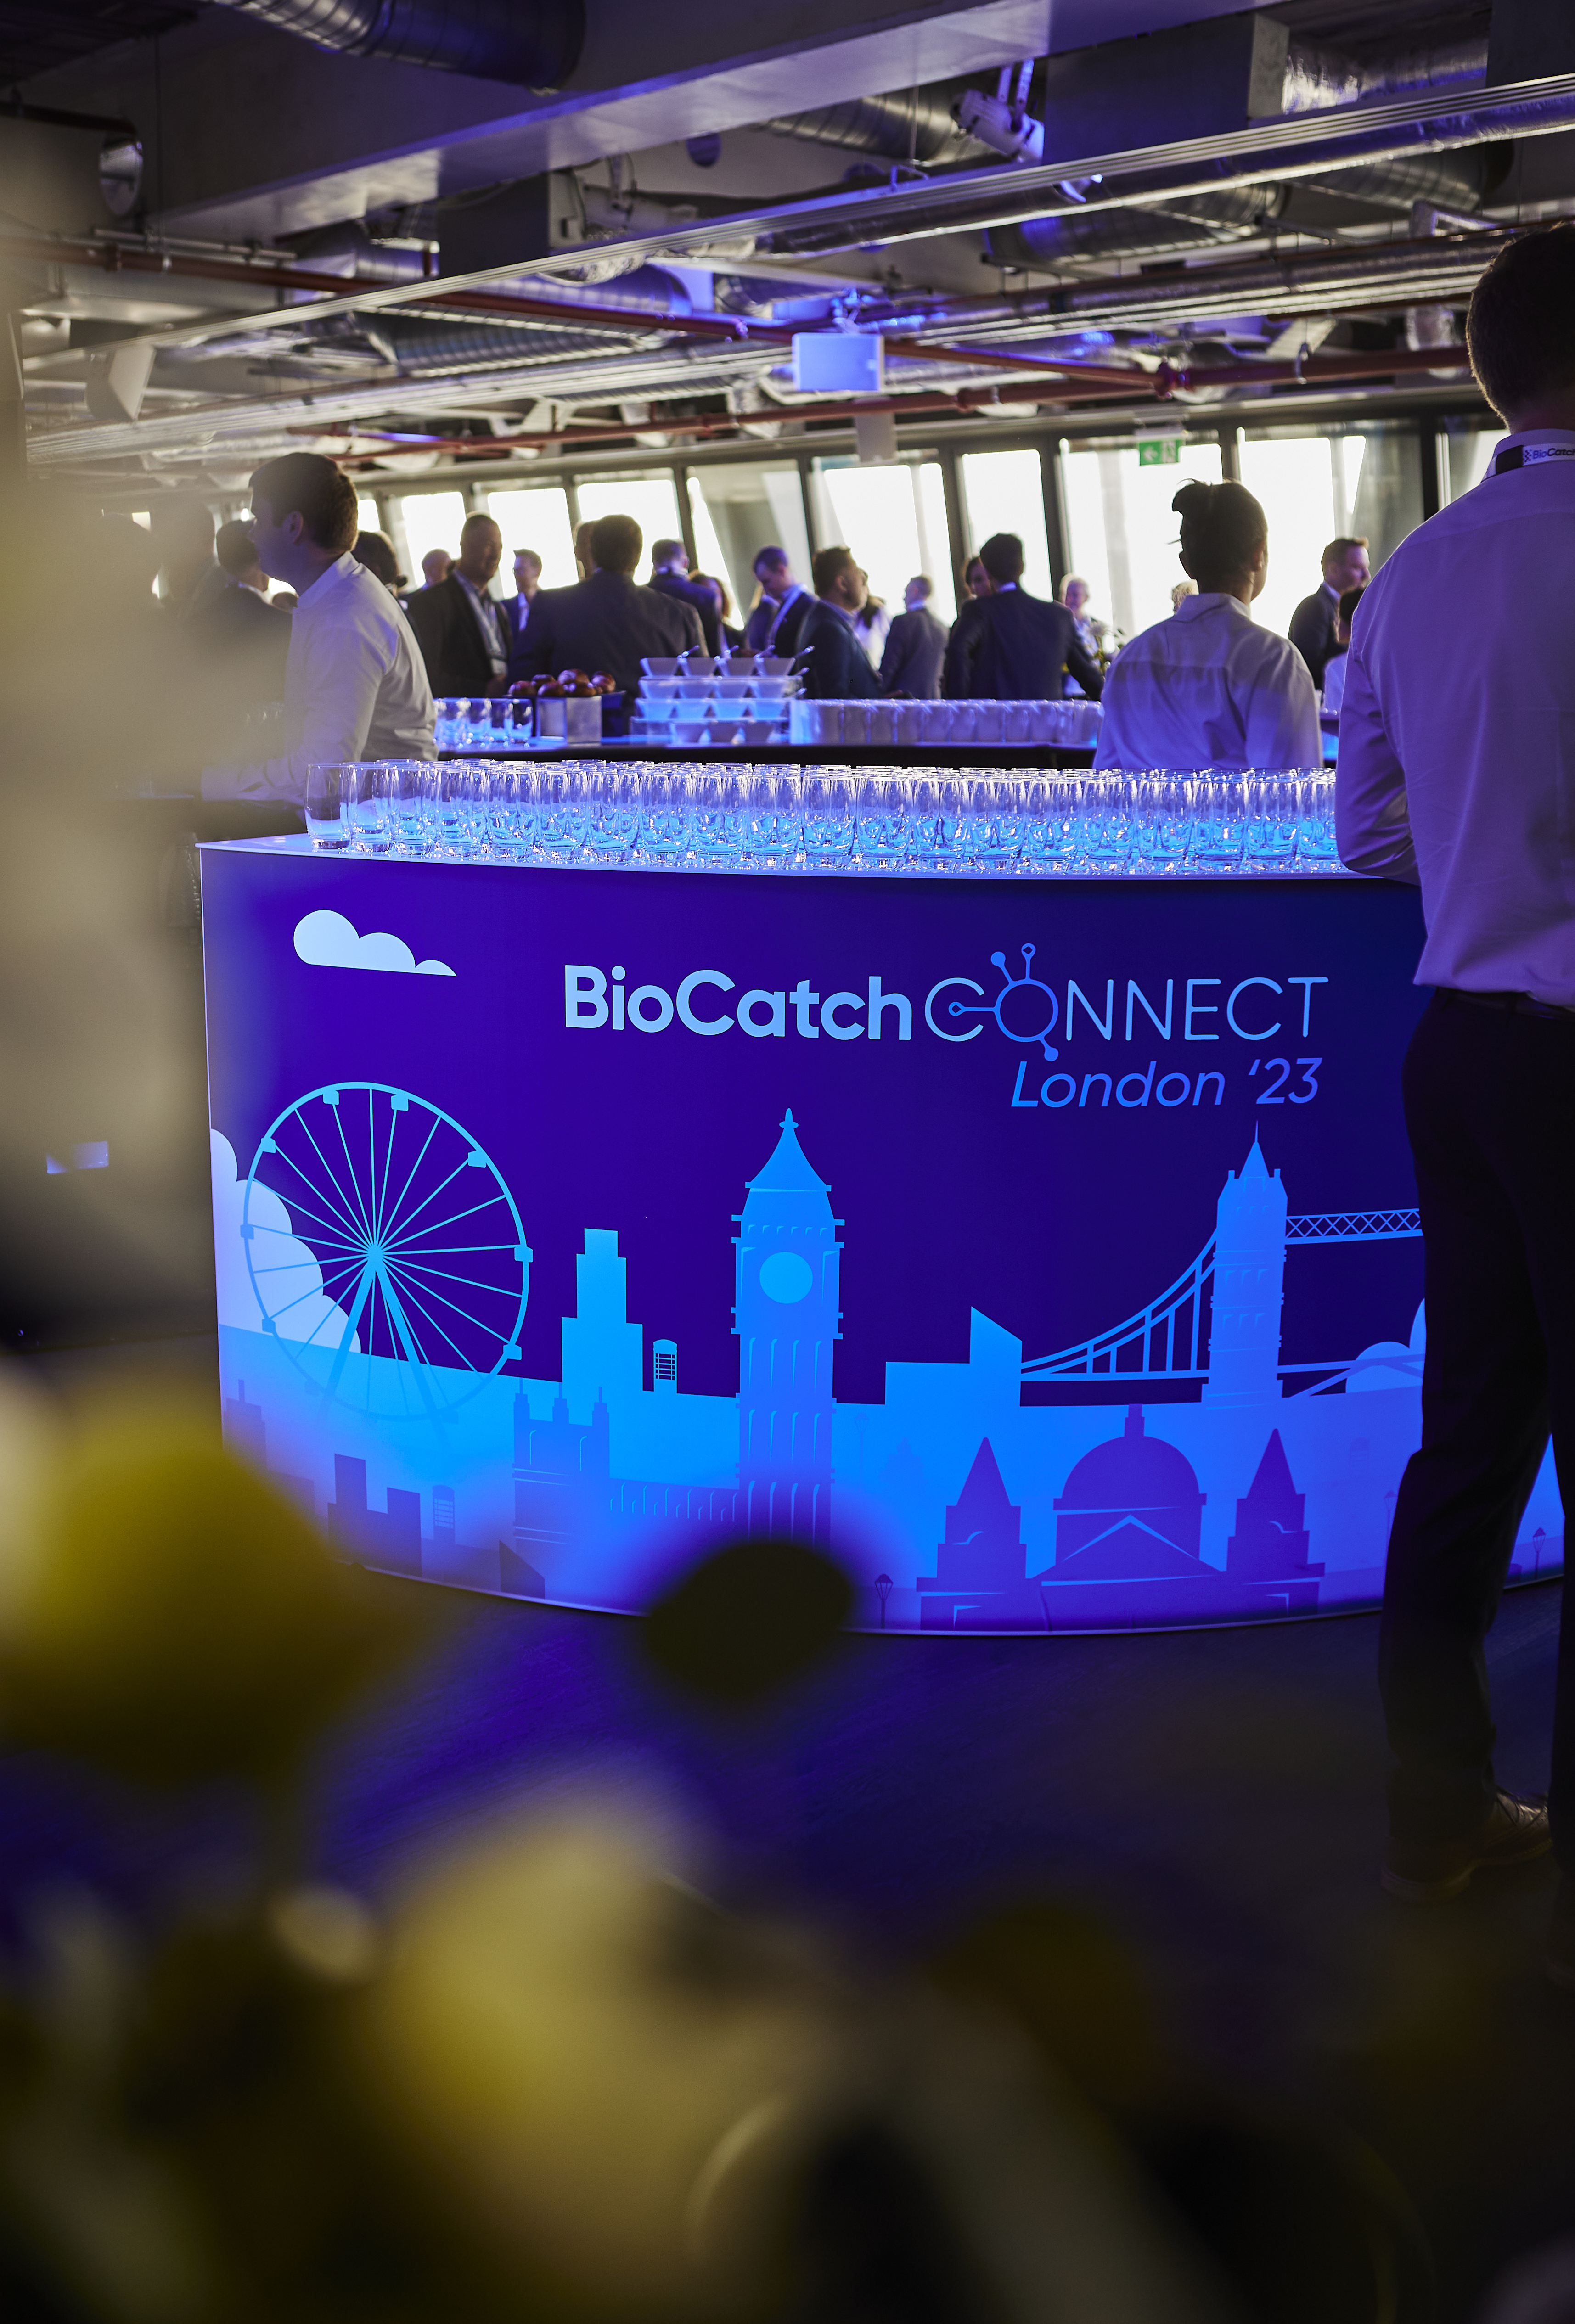 BioCatch Connect London: Discussing Our Opportunity, Capability and Duty to Stop Scams at Scale